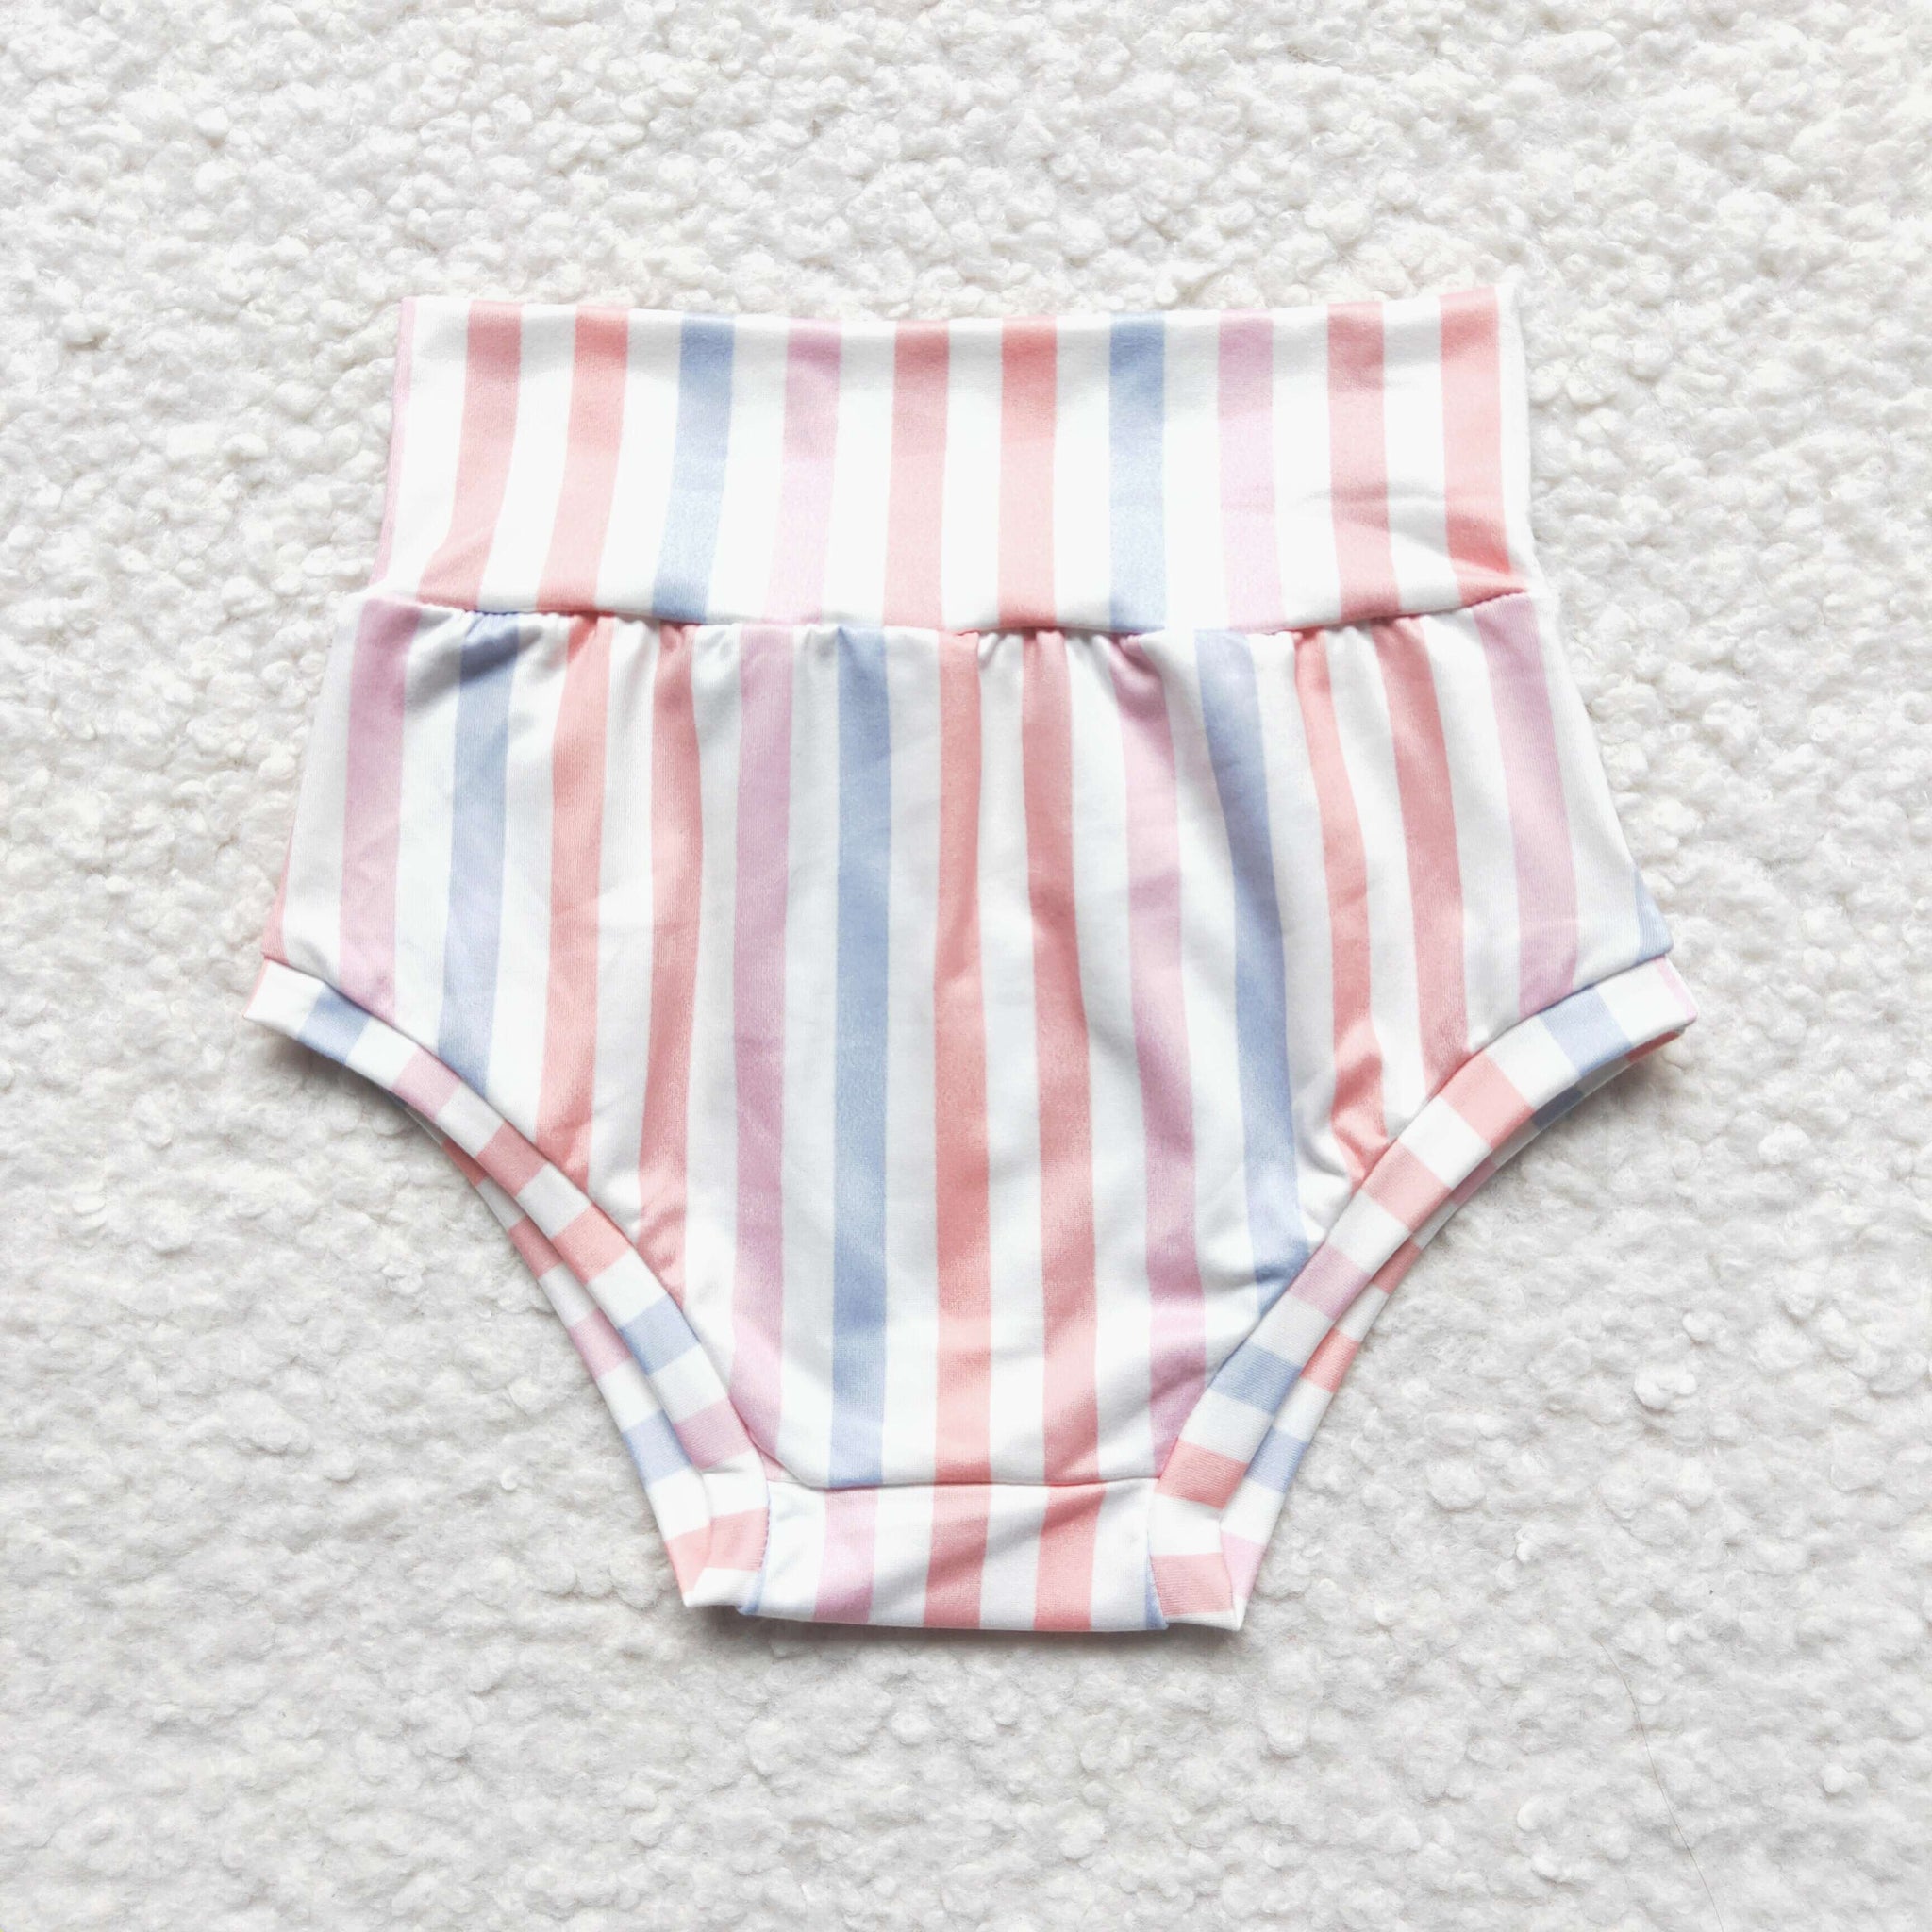 SS0044 baby clothes summer bummies bloomer